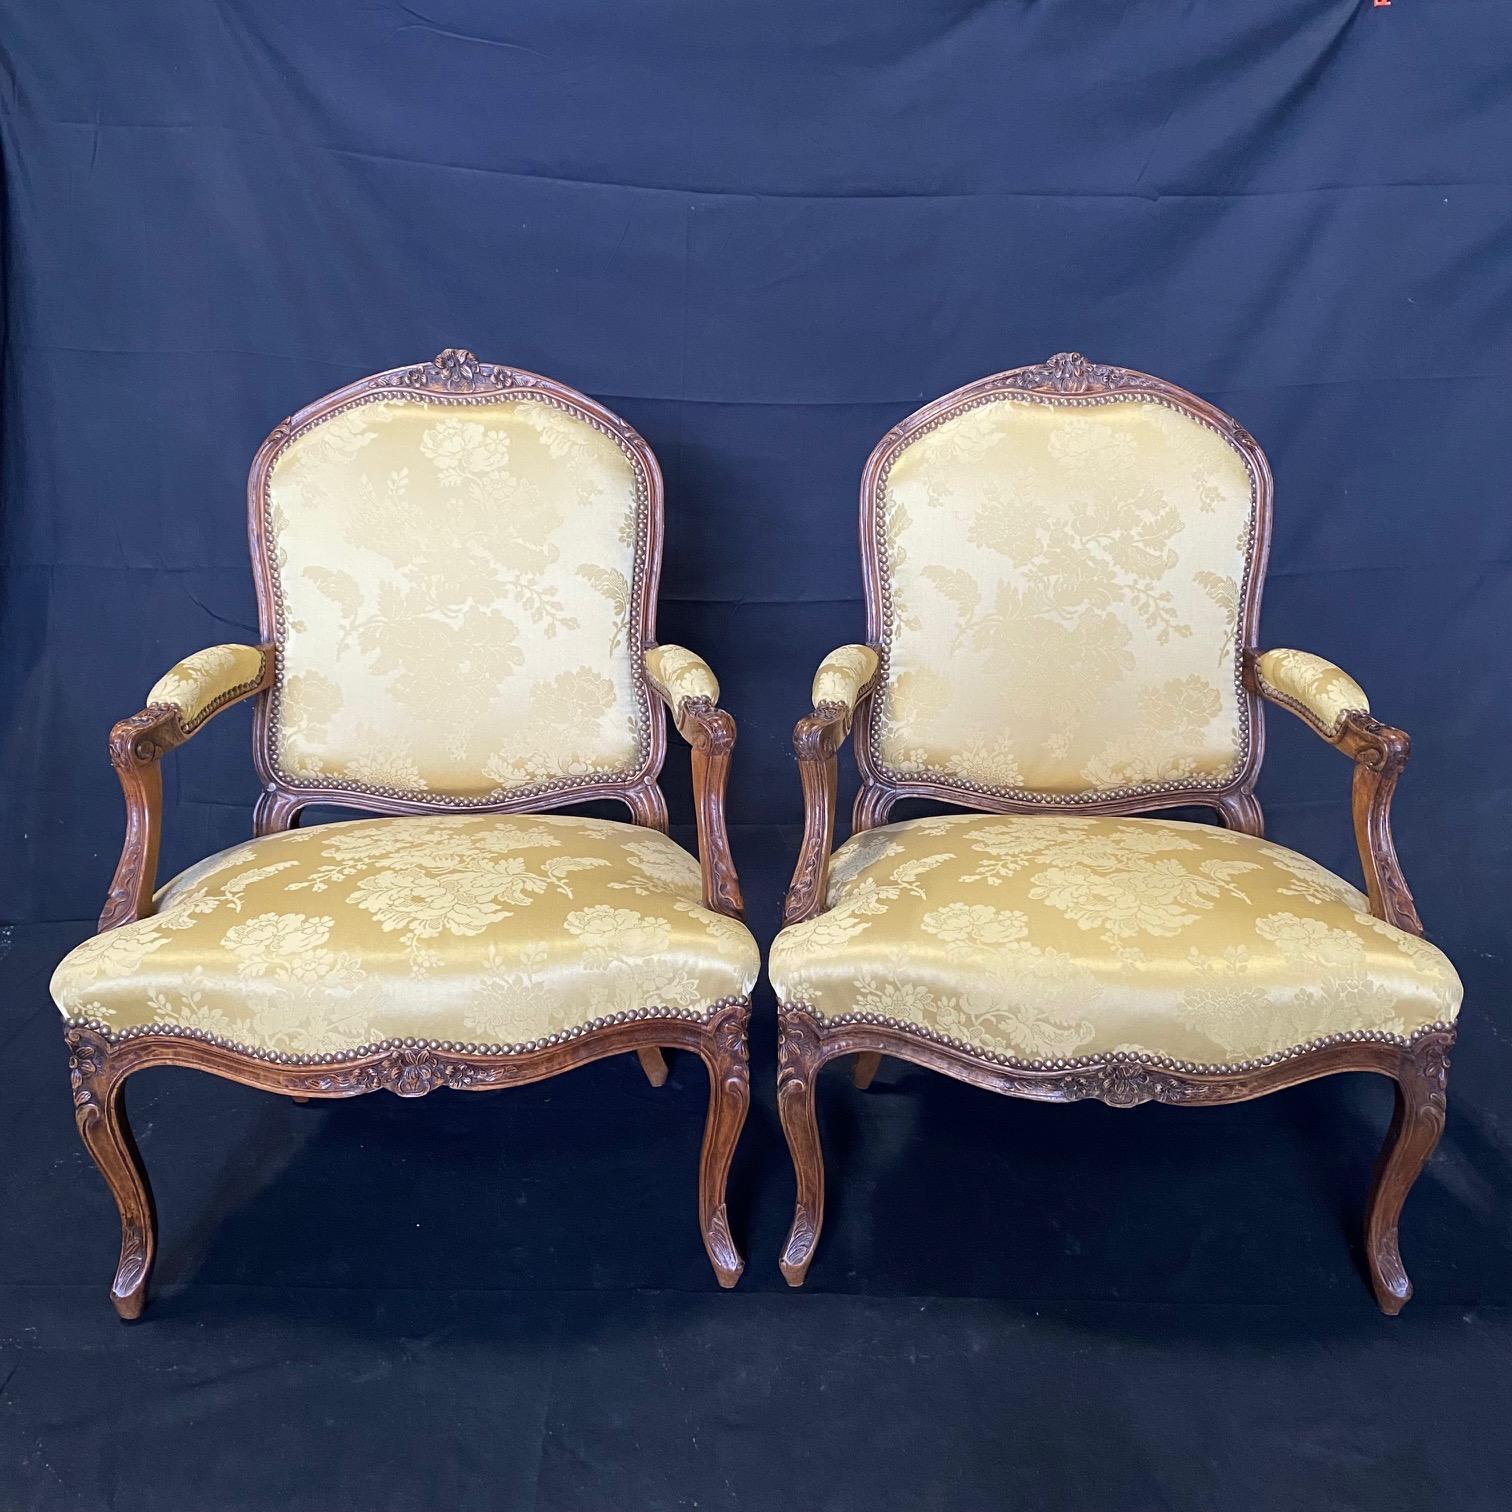 Two lovely and immaculate Louis XV walnut fauteuils or open armchairs, each with a cartouche back, surmounted with intricate high quality floral carving, scrolling arms and shaped seat frames, all raised on cabriole legs. Upholstered in a beautiful